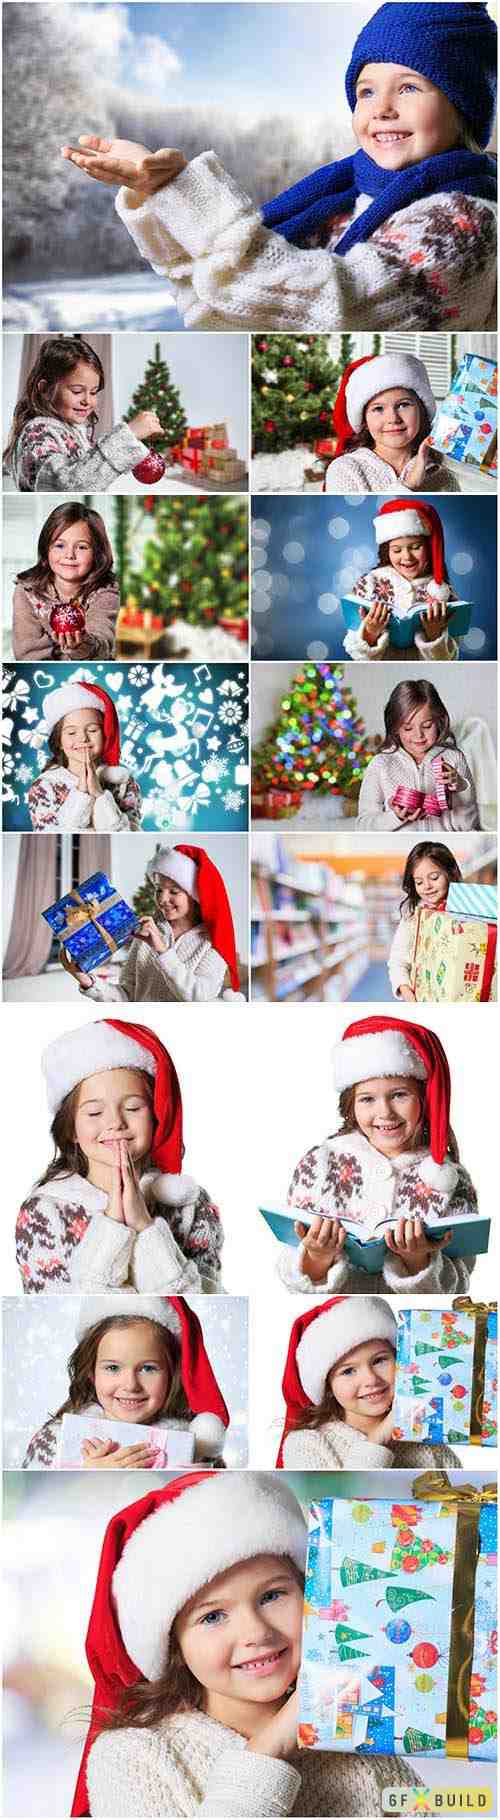 New Year and Christmas stock photos 84